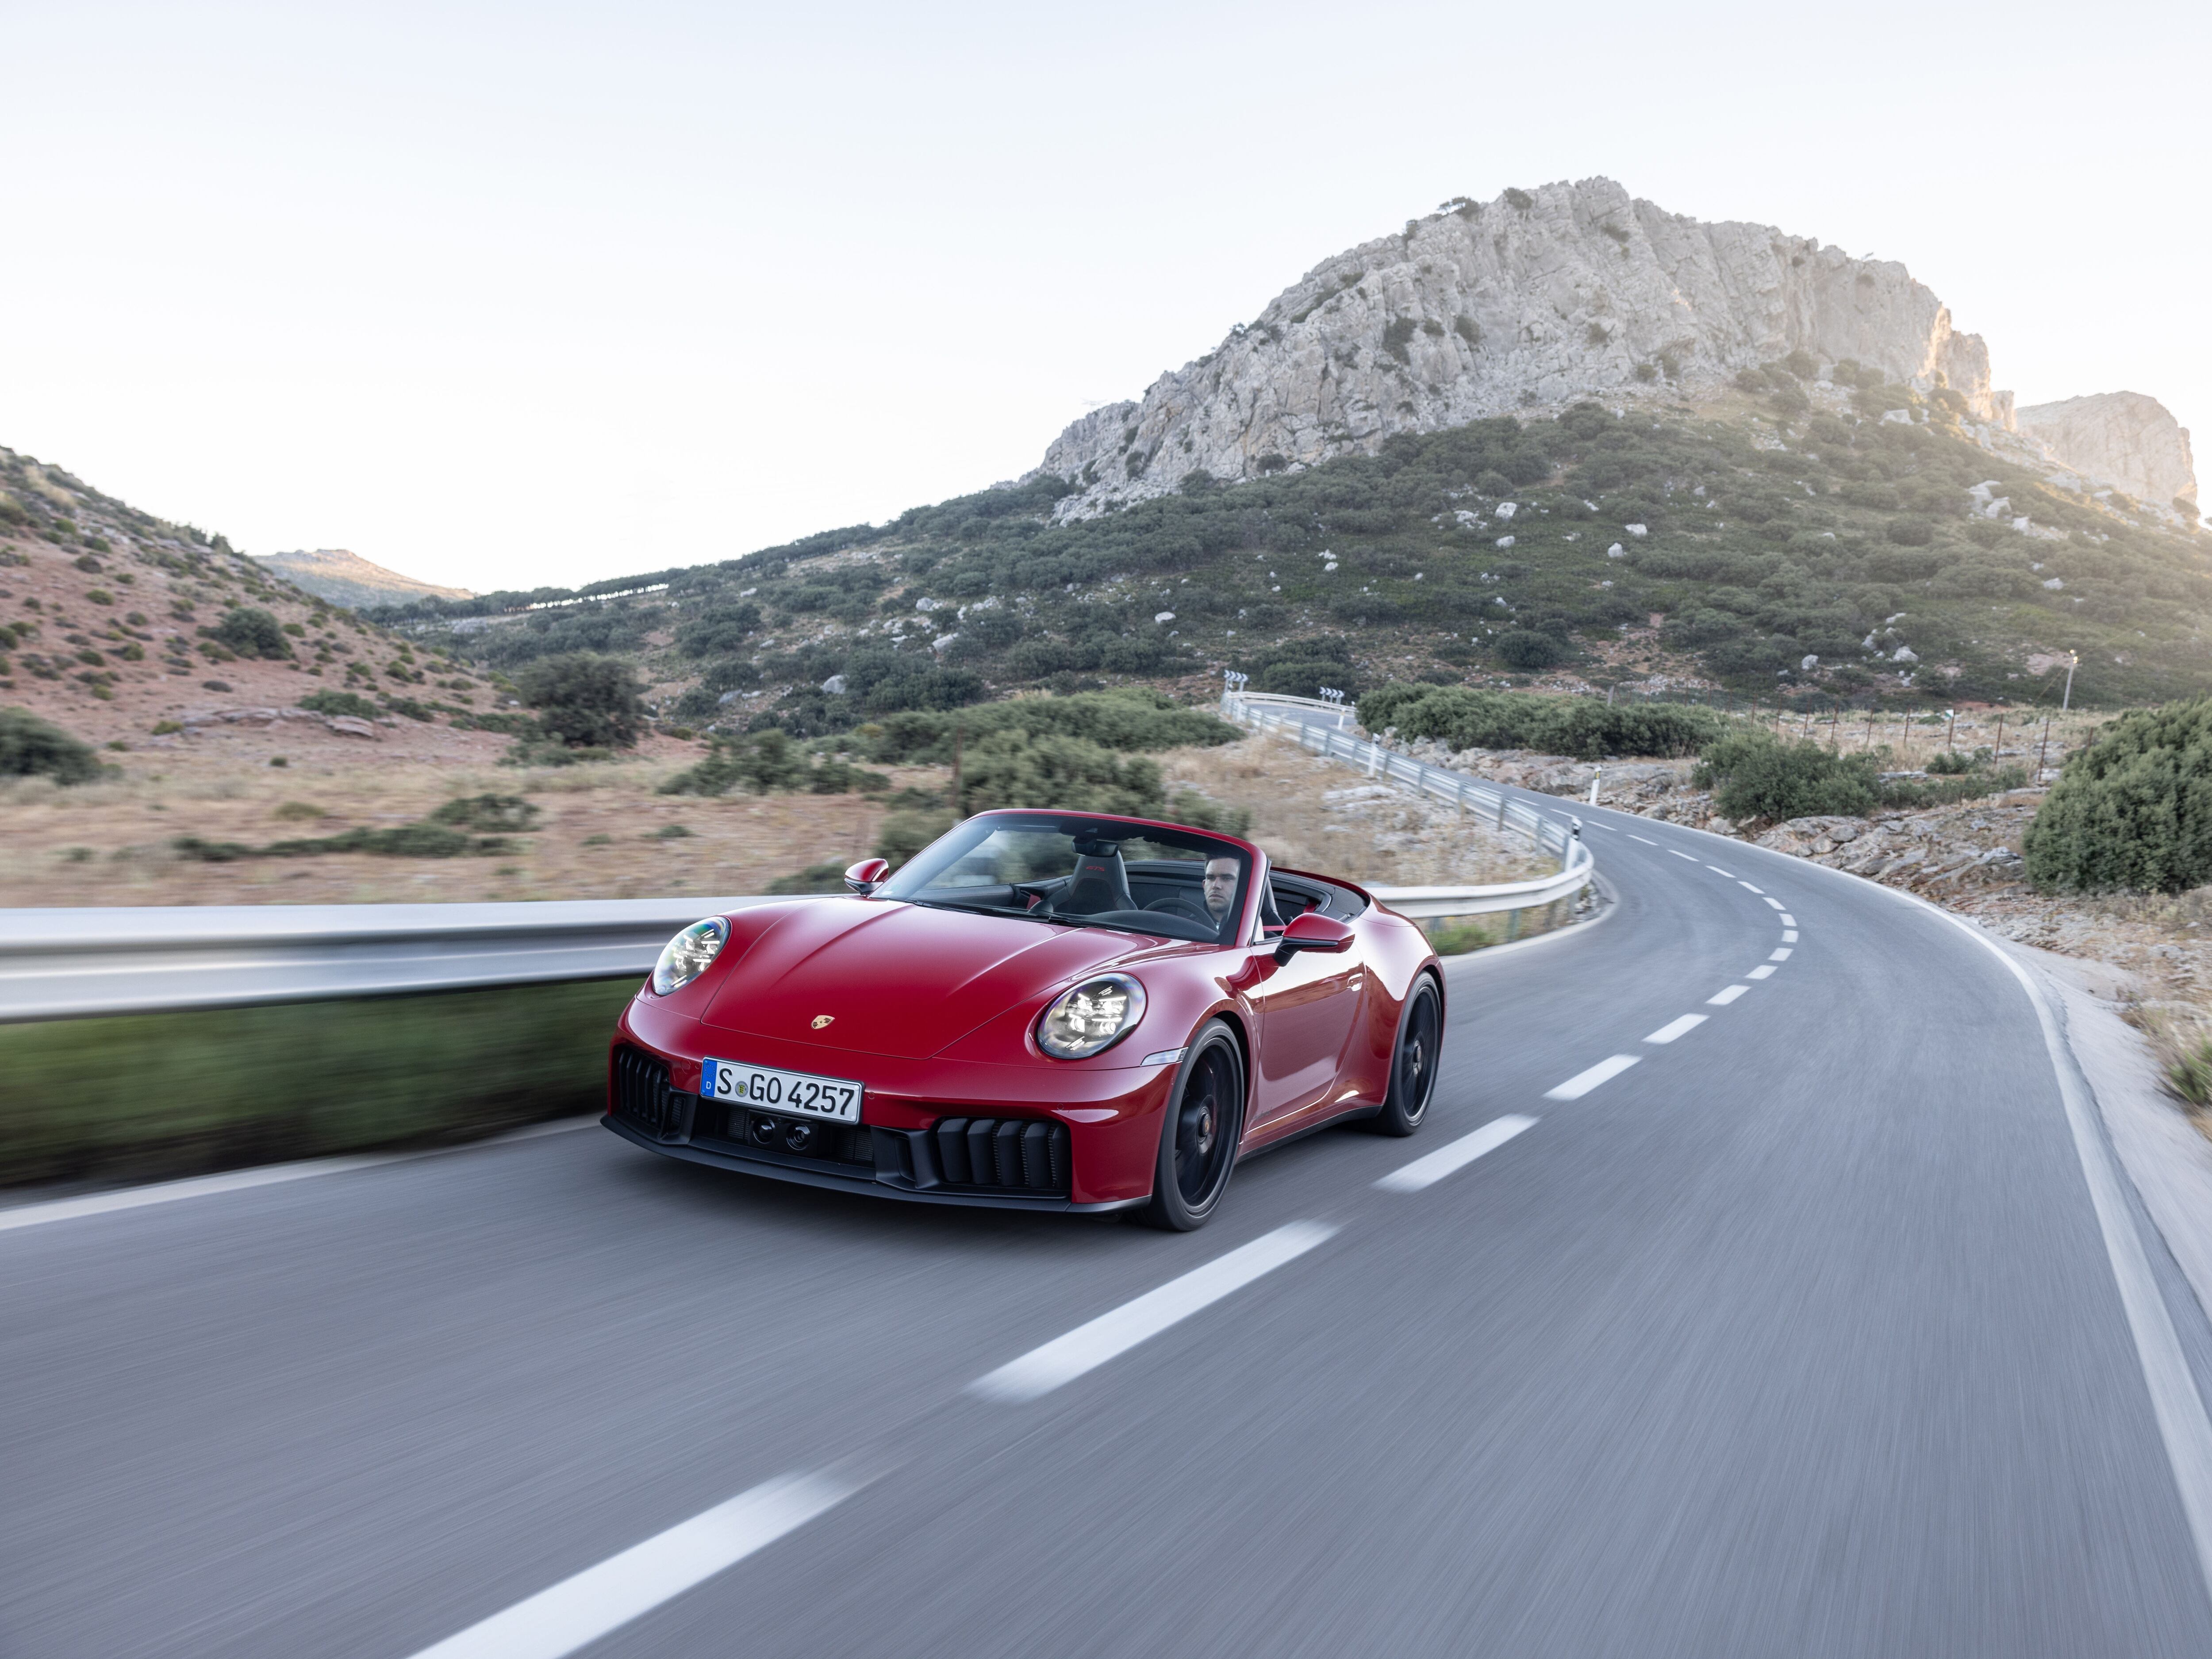 First Drive: The Porsche 911 Carrera GTS kickstarts an electrified future for this sports car icon